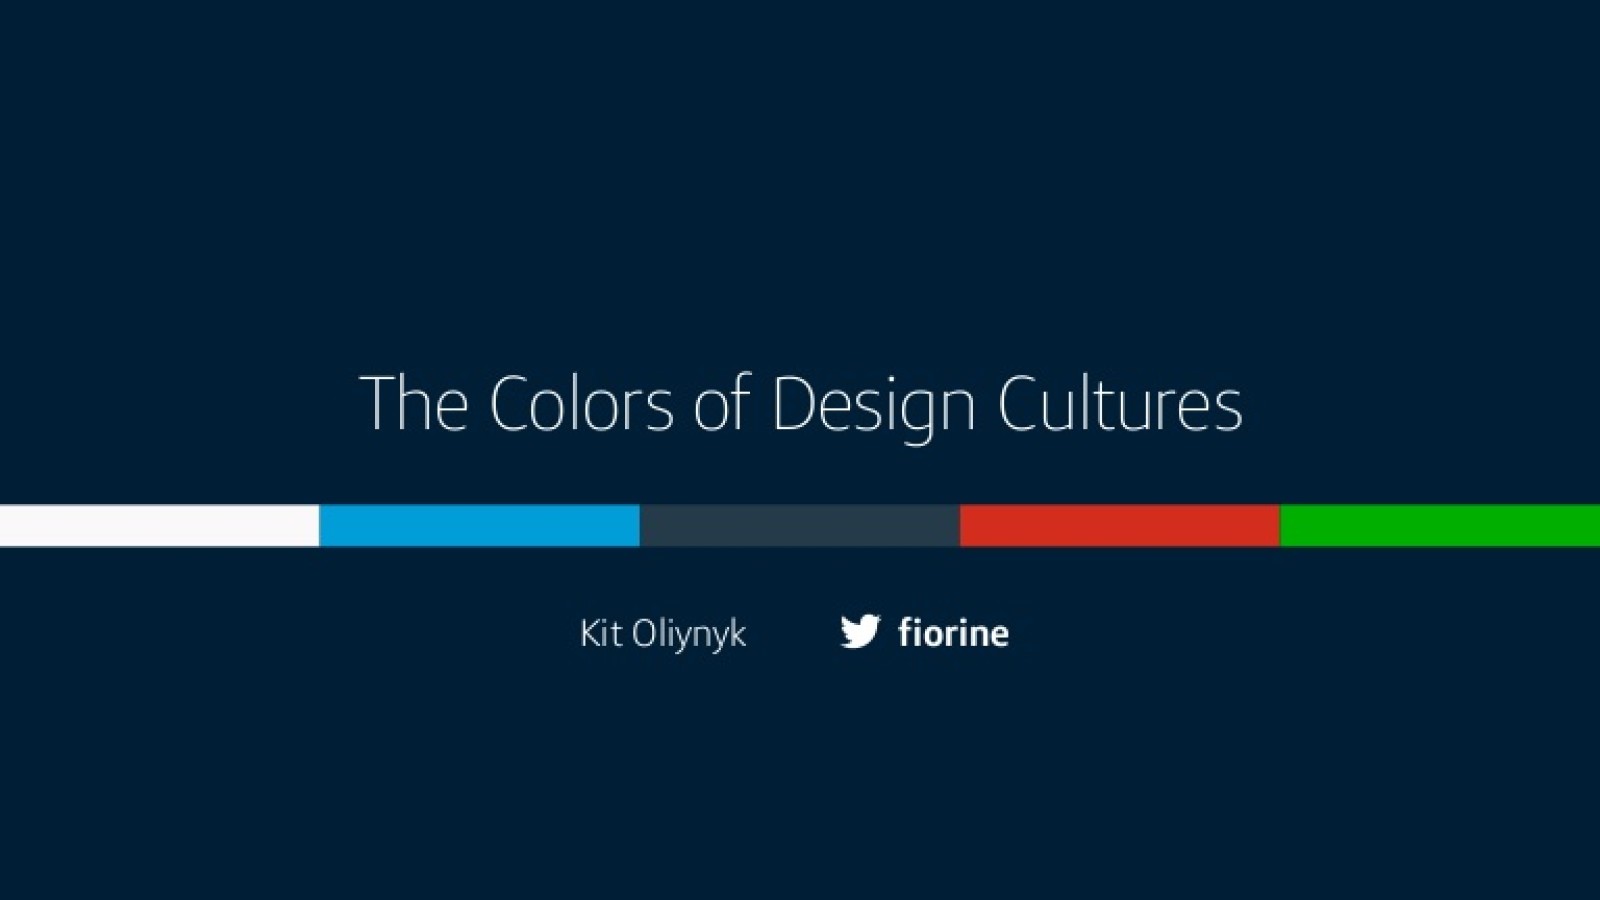 The Colors of Design Cultures